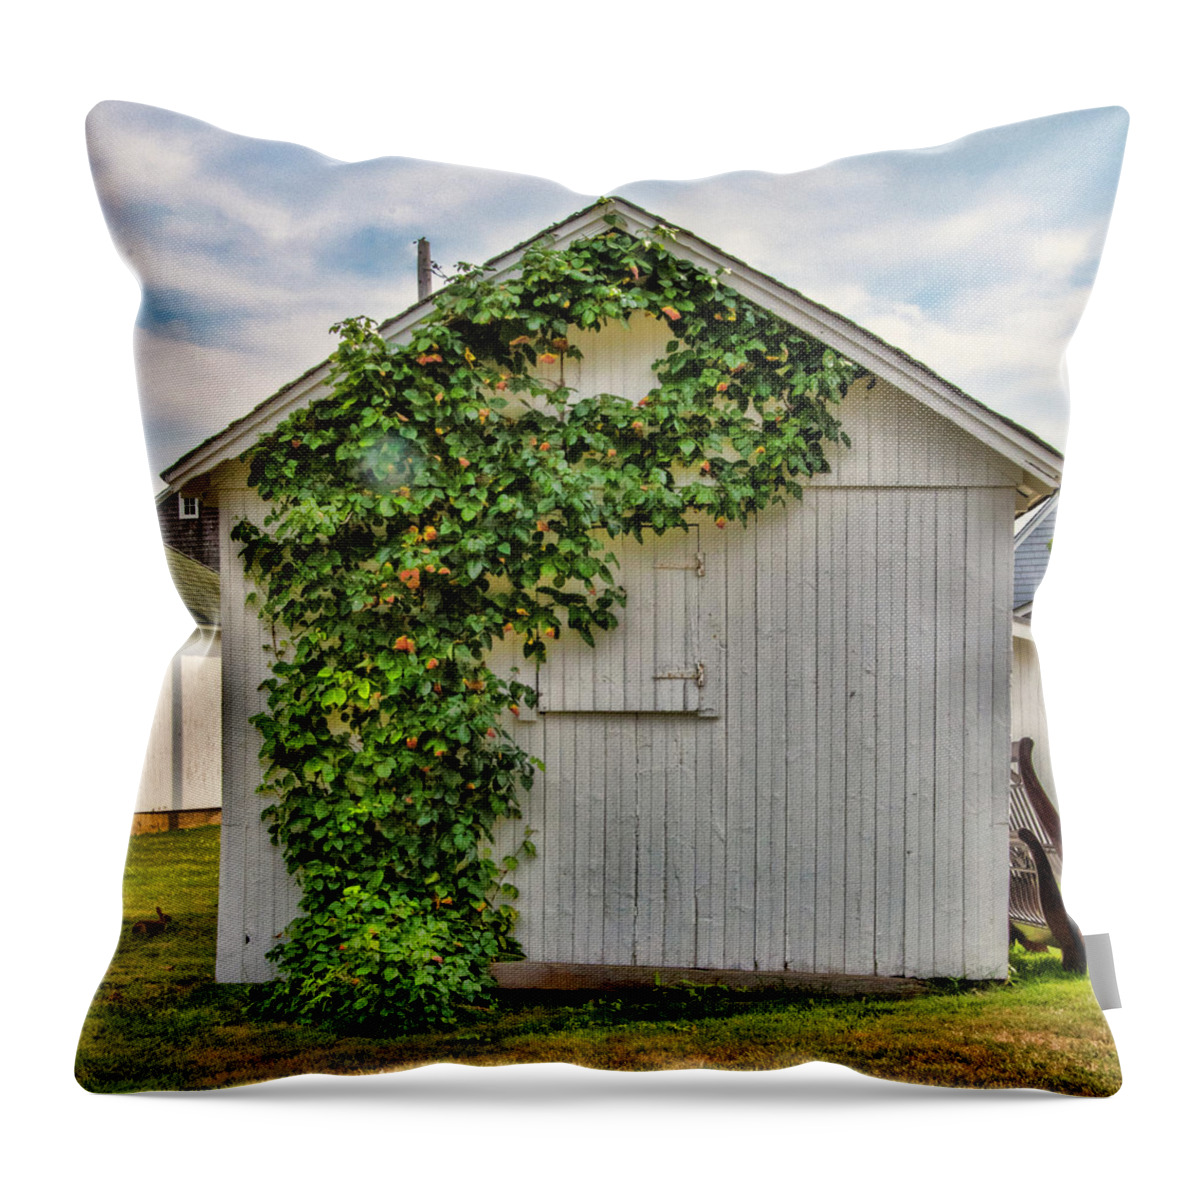 Shed Throw Pillow featuring the photograph Vines On Shed by Cathy Kovarik